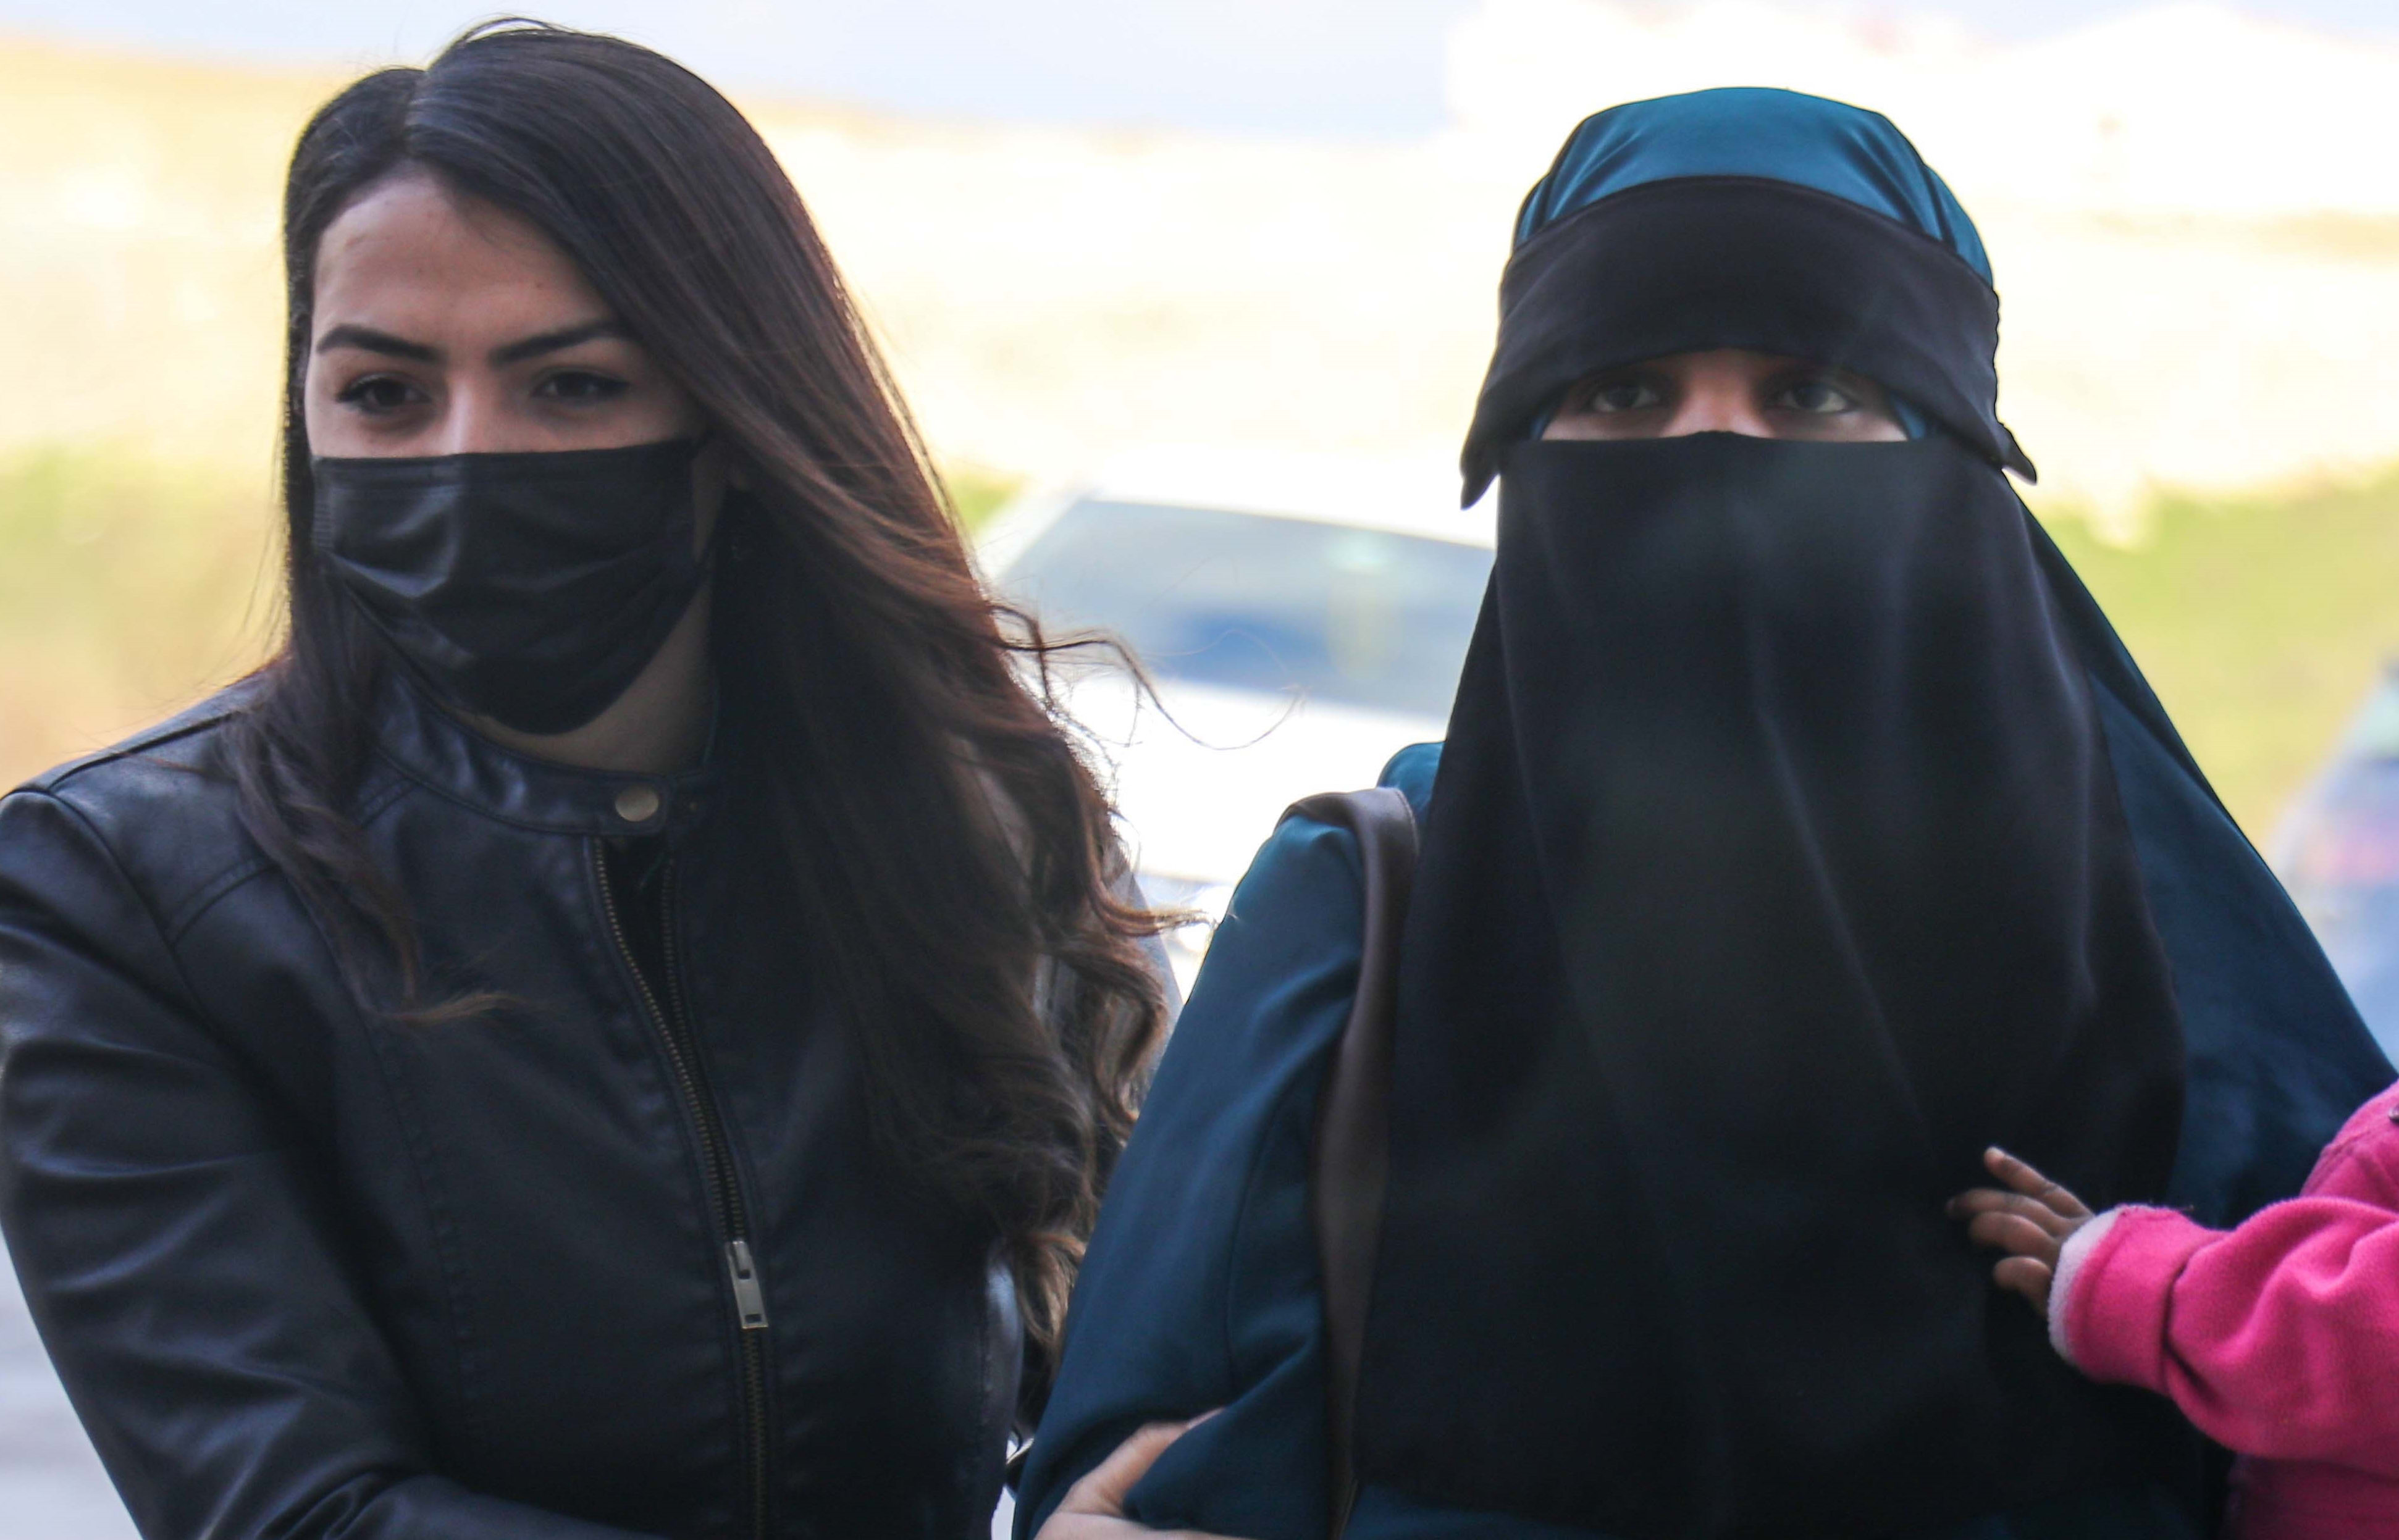 A 26-year-old New Zealand citizen and two children were taken to court at Hatay under security measures. Turkye's Ministry of National Defence said they tried to enter from Syria illegally.